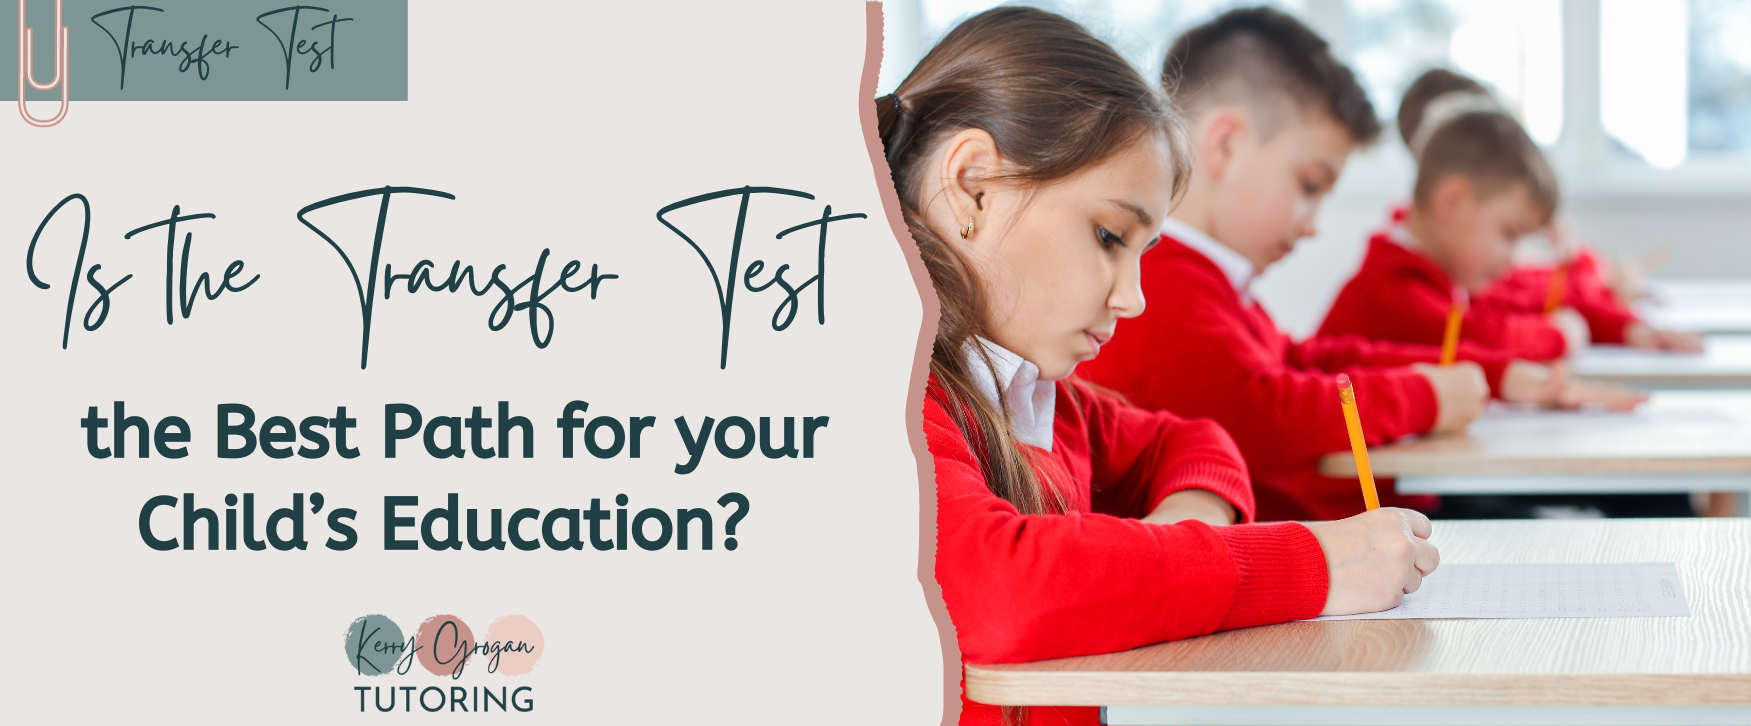 Is the Transfer Test NI the Best Path for Your Child's Education?